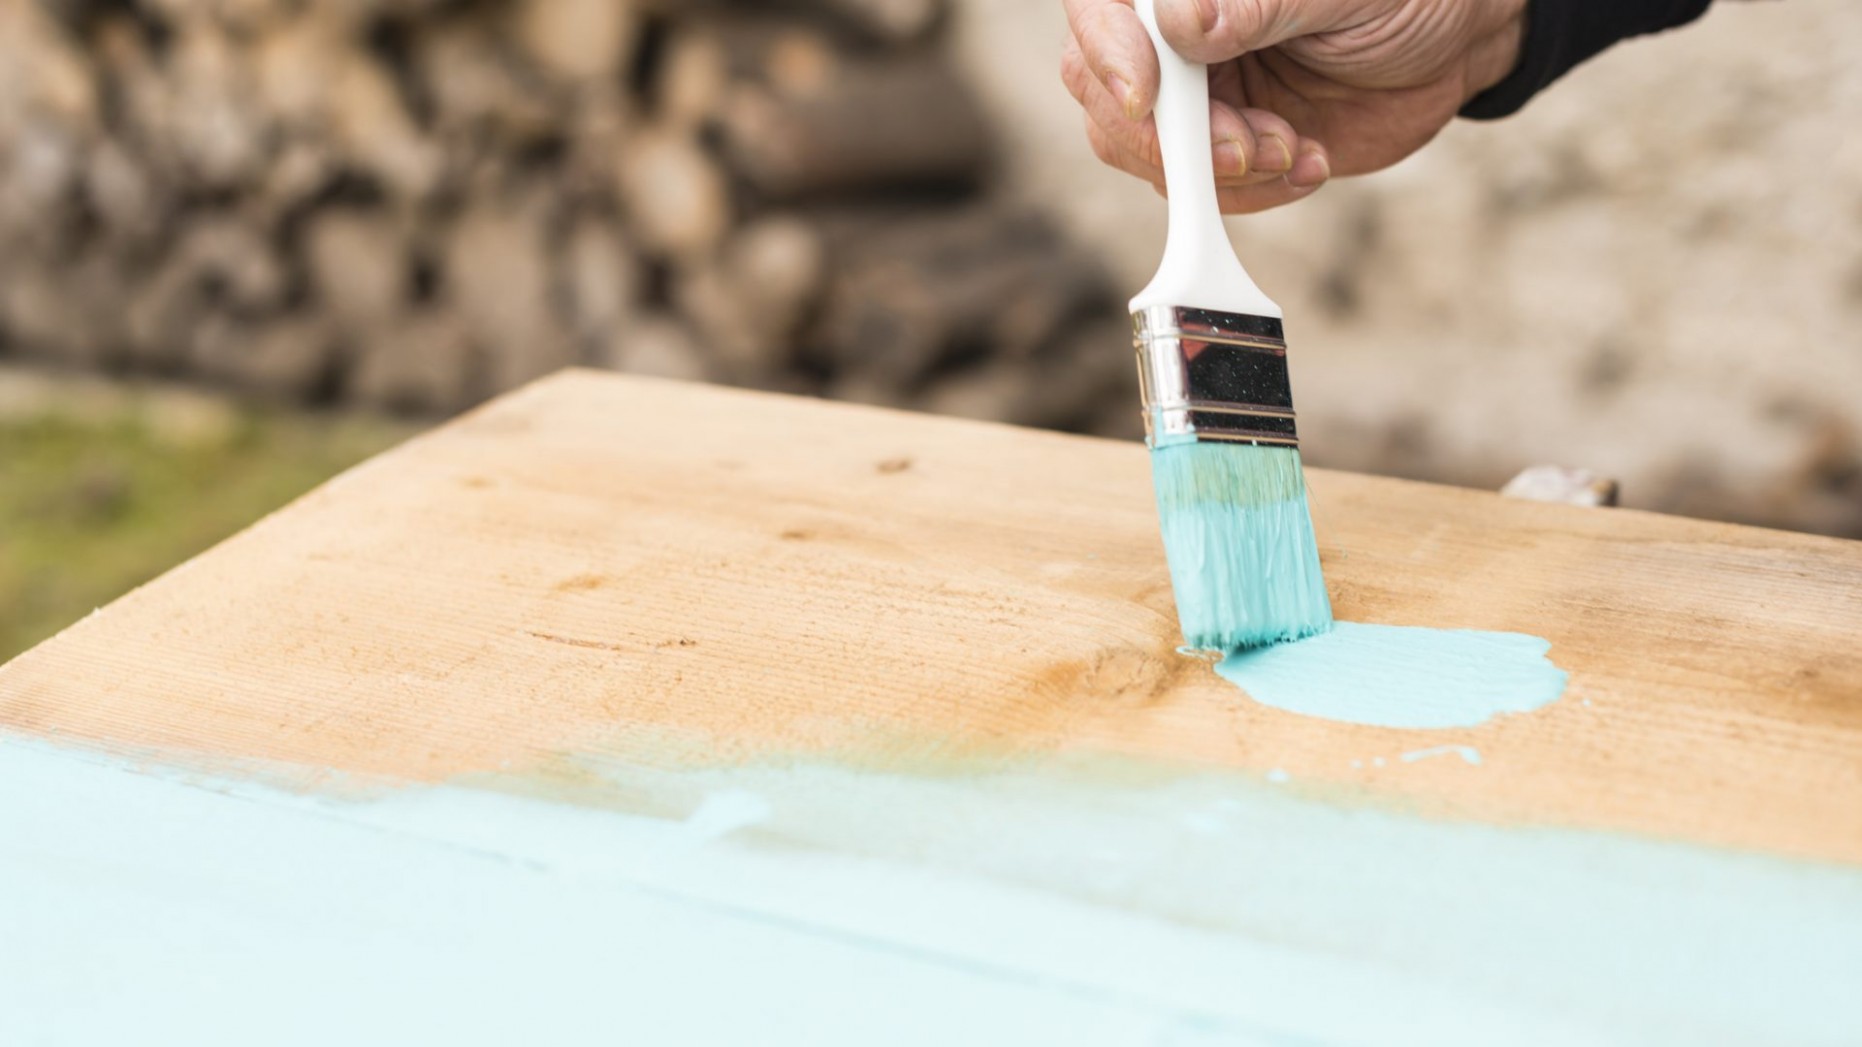 Can You Use Chalk Paint For Outdoor Furniture? | Rainbow Chalk Markers Can You Paint Over Chalk Spray Paint